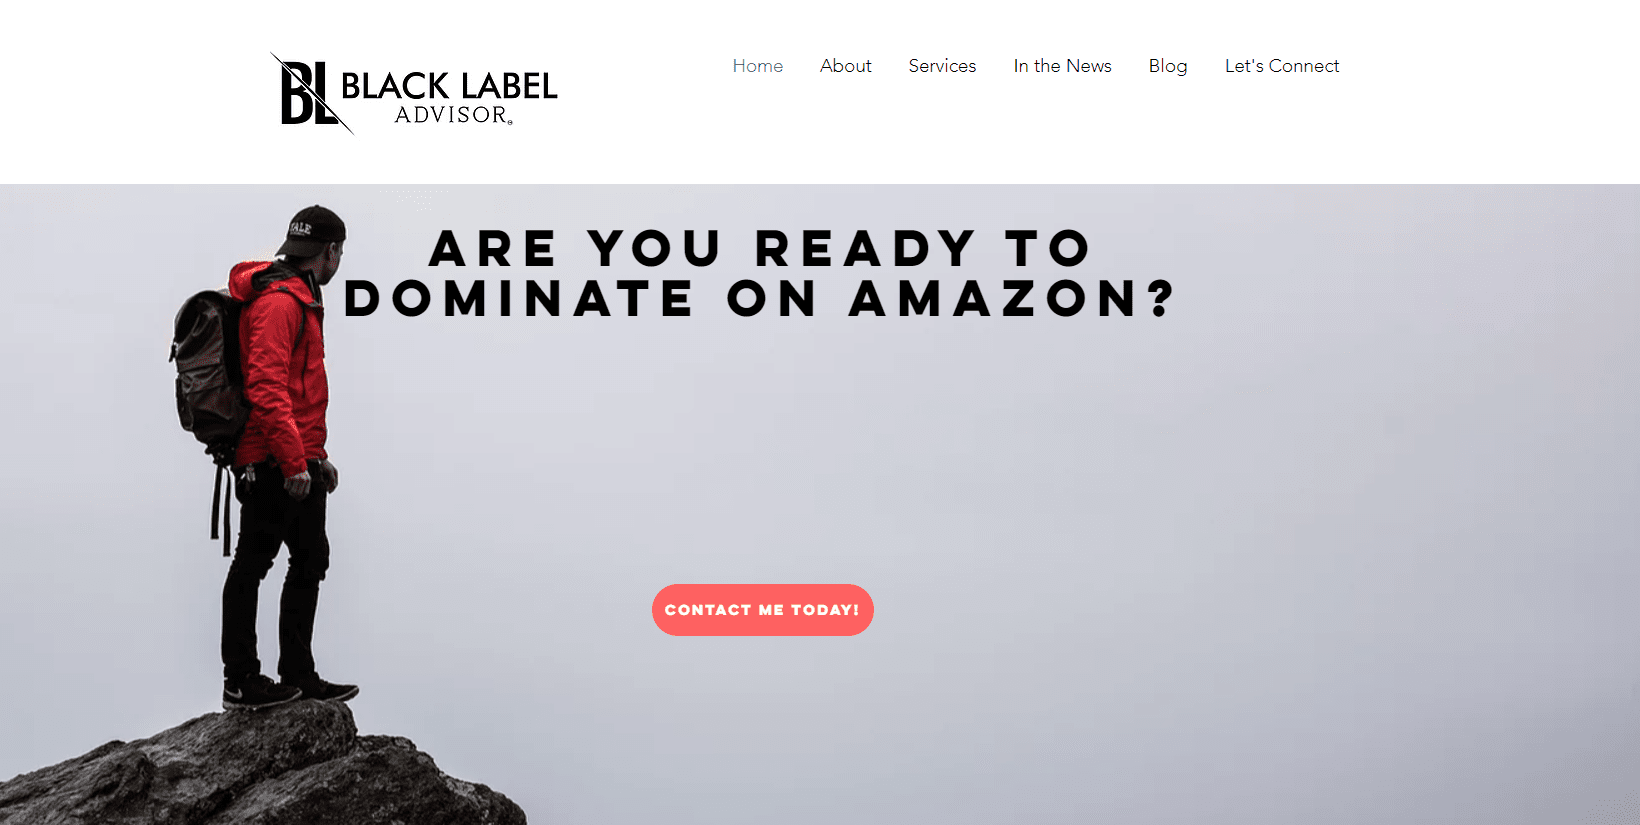 How To Become A Successful Amazon Seller - Black Label Advisor